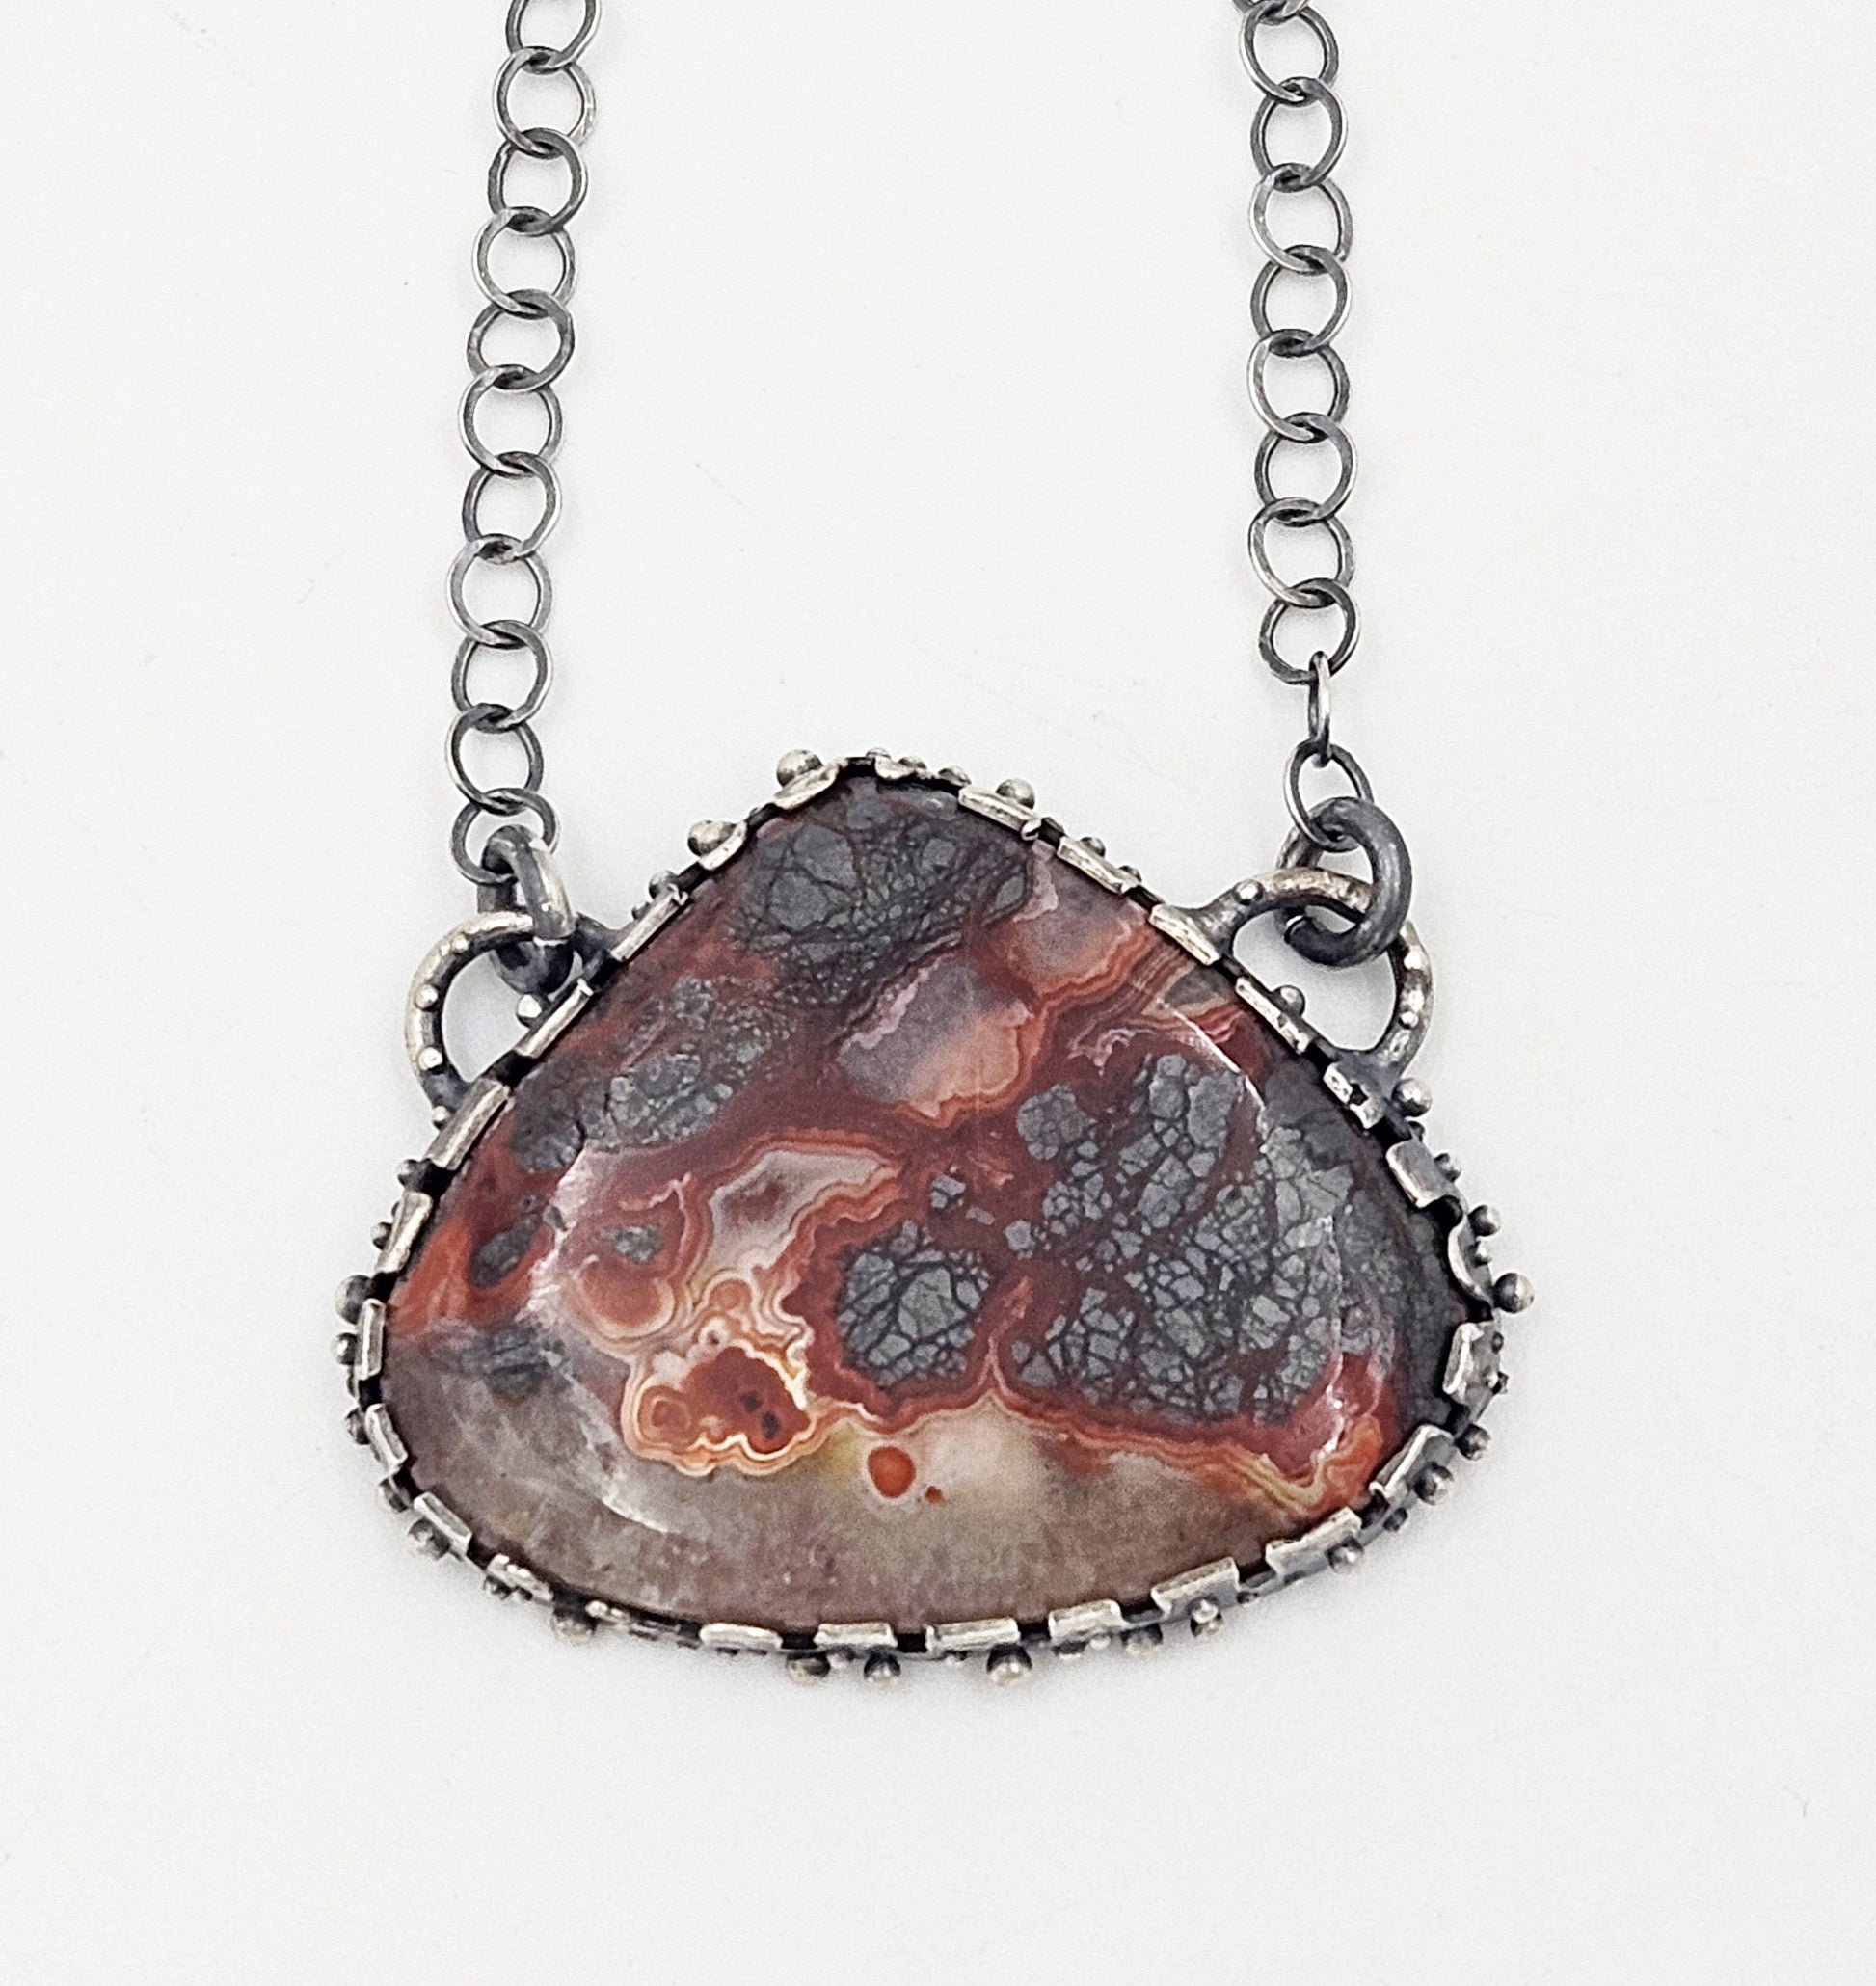 Artisan Signed Necklace Jewelry Artisan Signed Sterling & Crazy Lace Agate Pendant Necklace